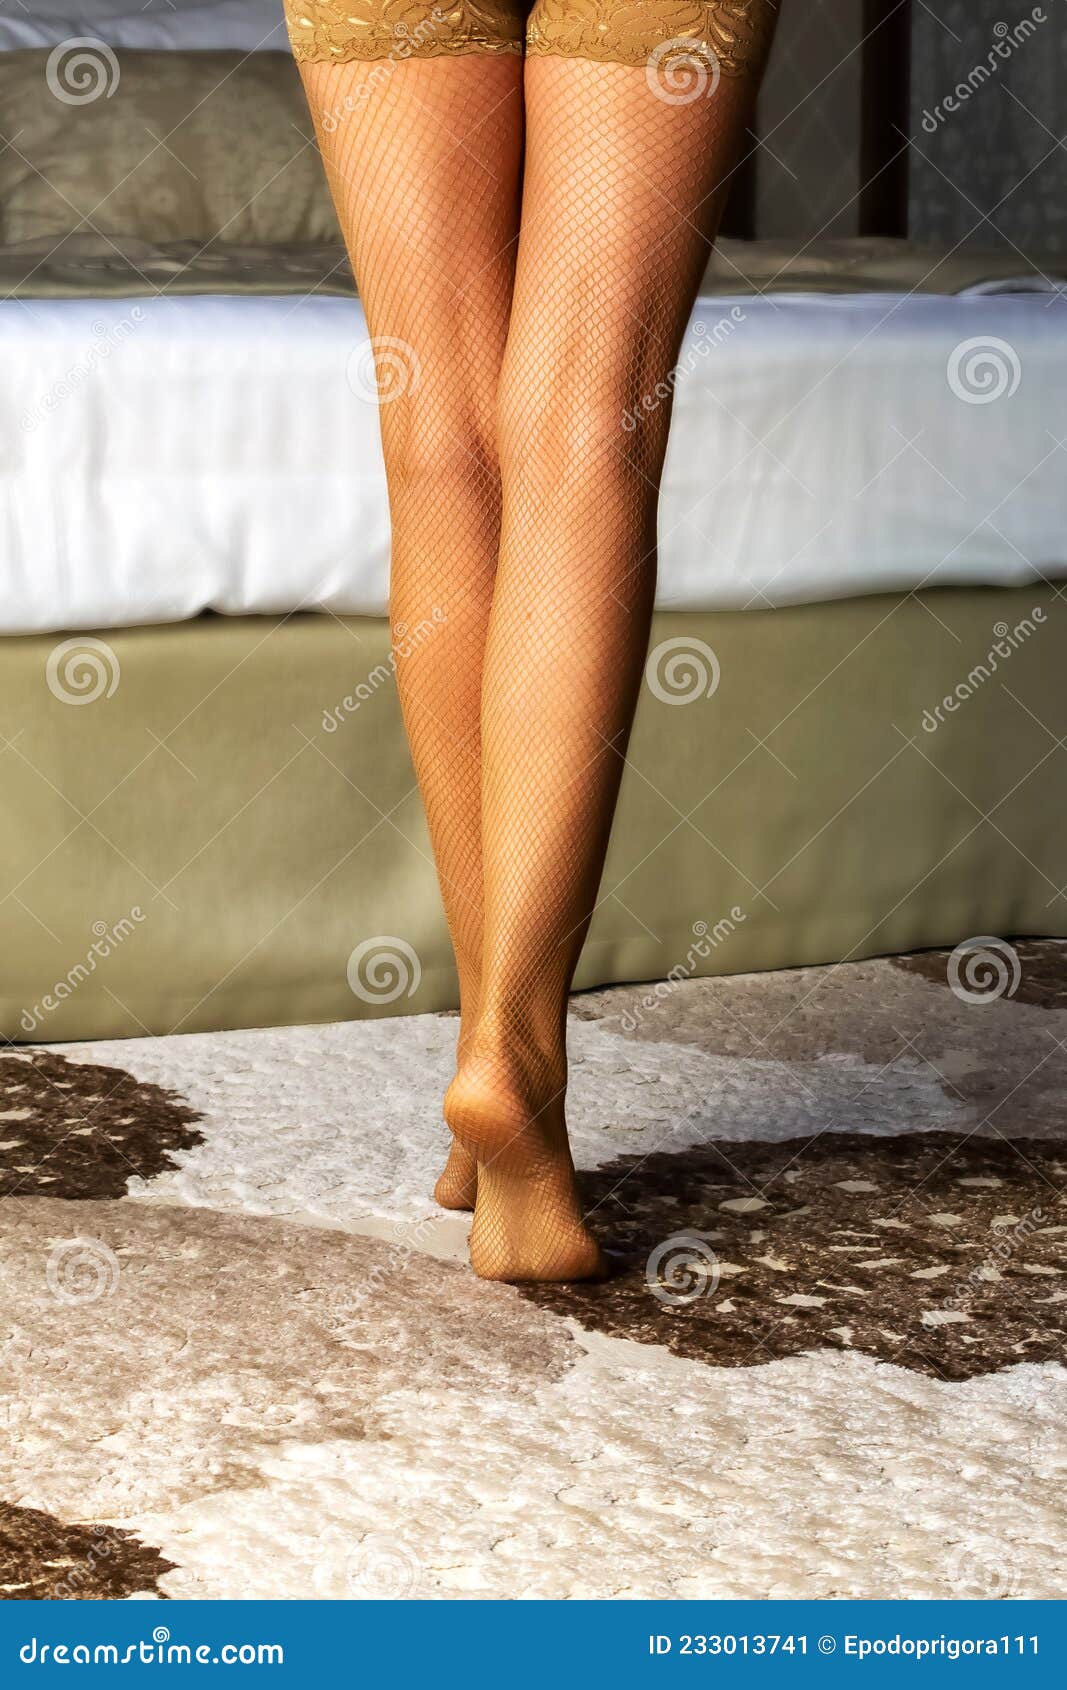 Female Legs in Fishnet Stockings with Lace on the Background of the image image